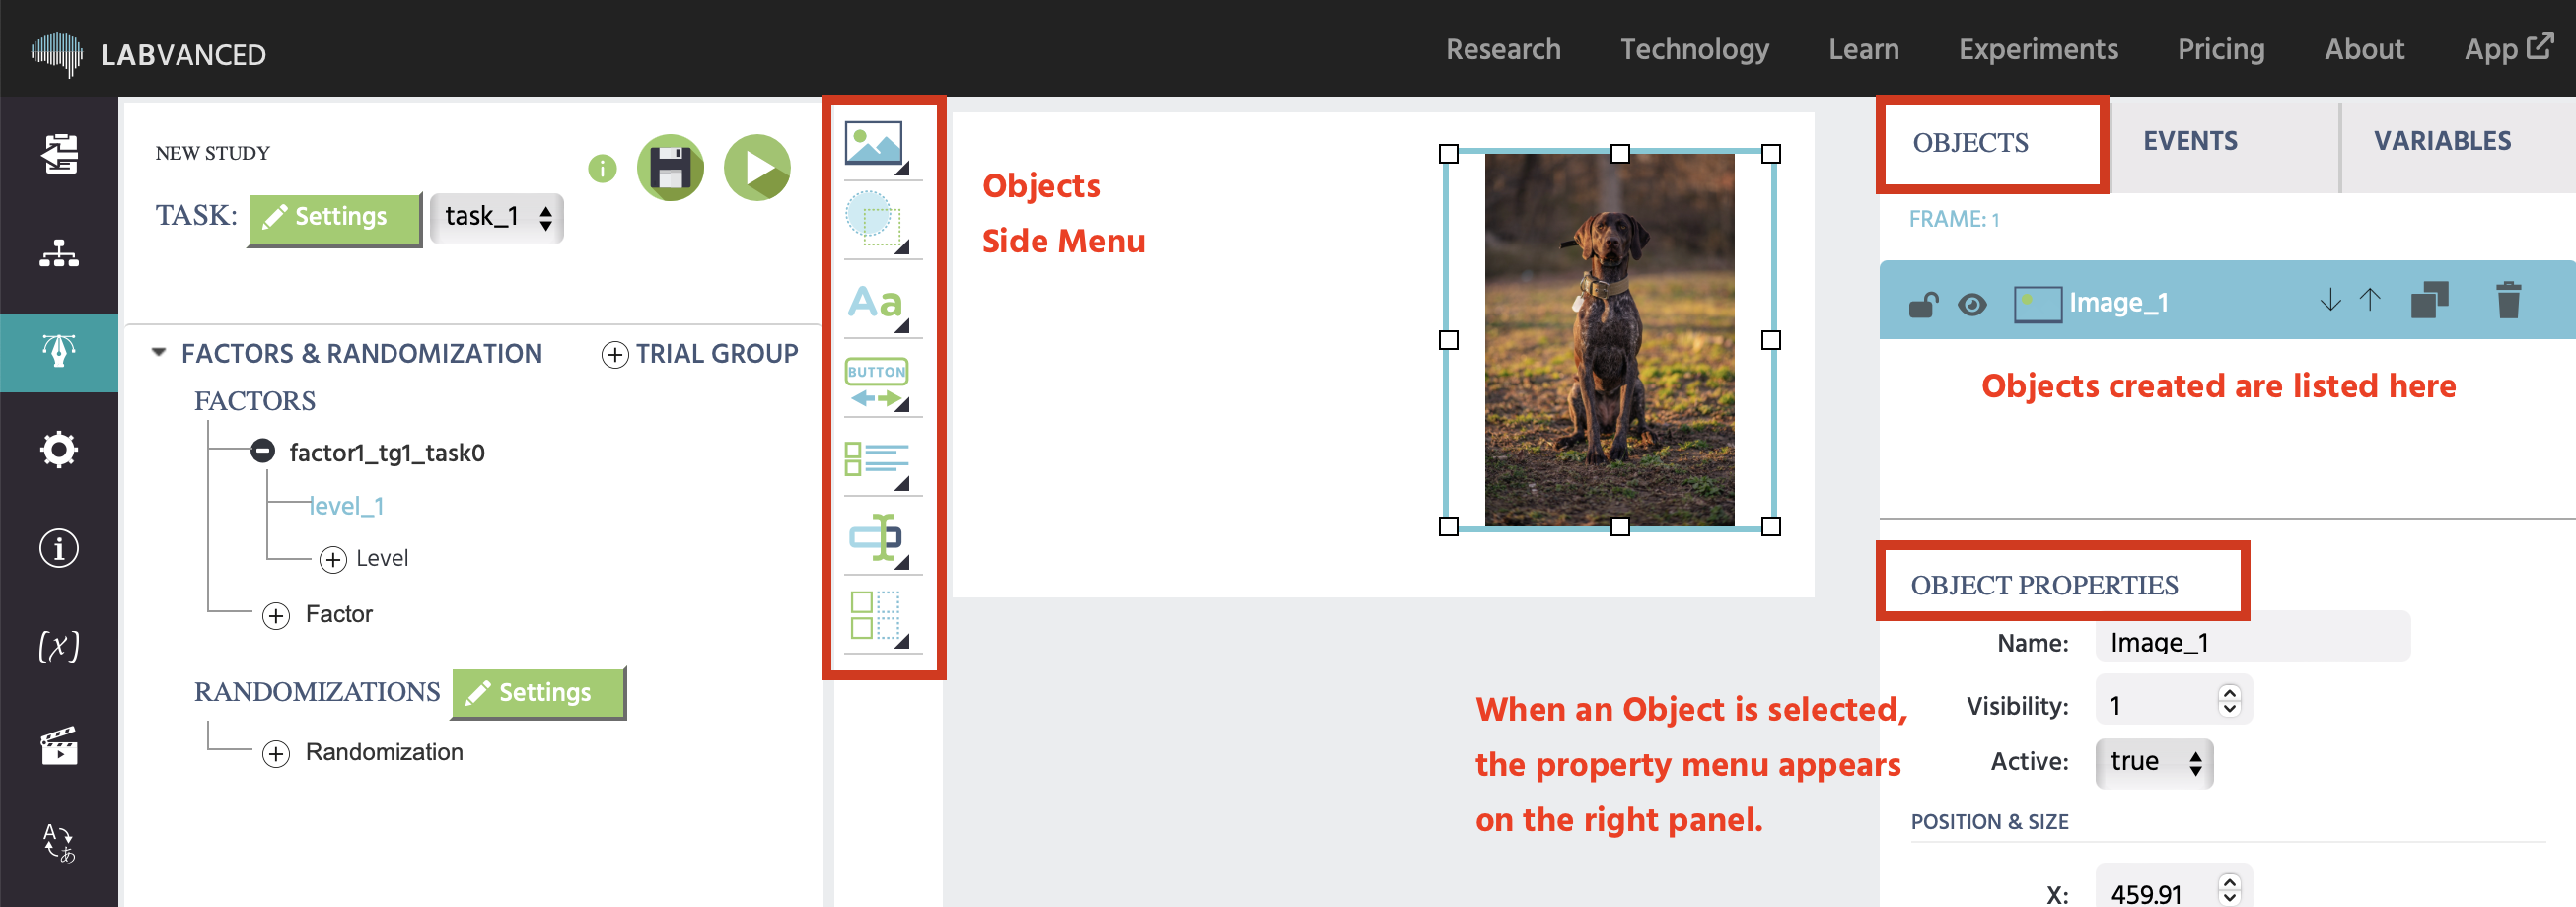 Highlighting relevant areas in the Task editors with regards to Object use.